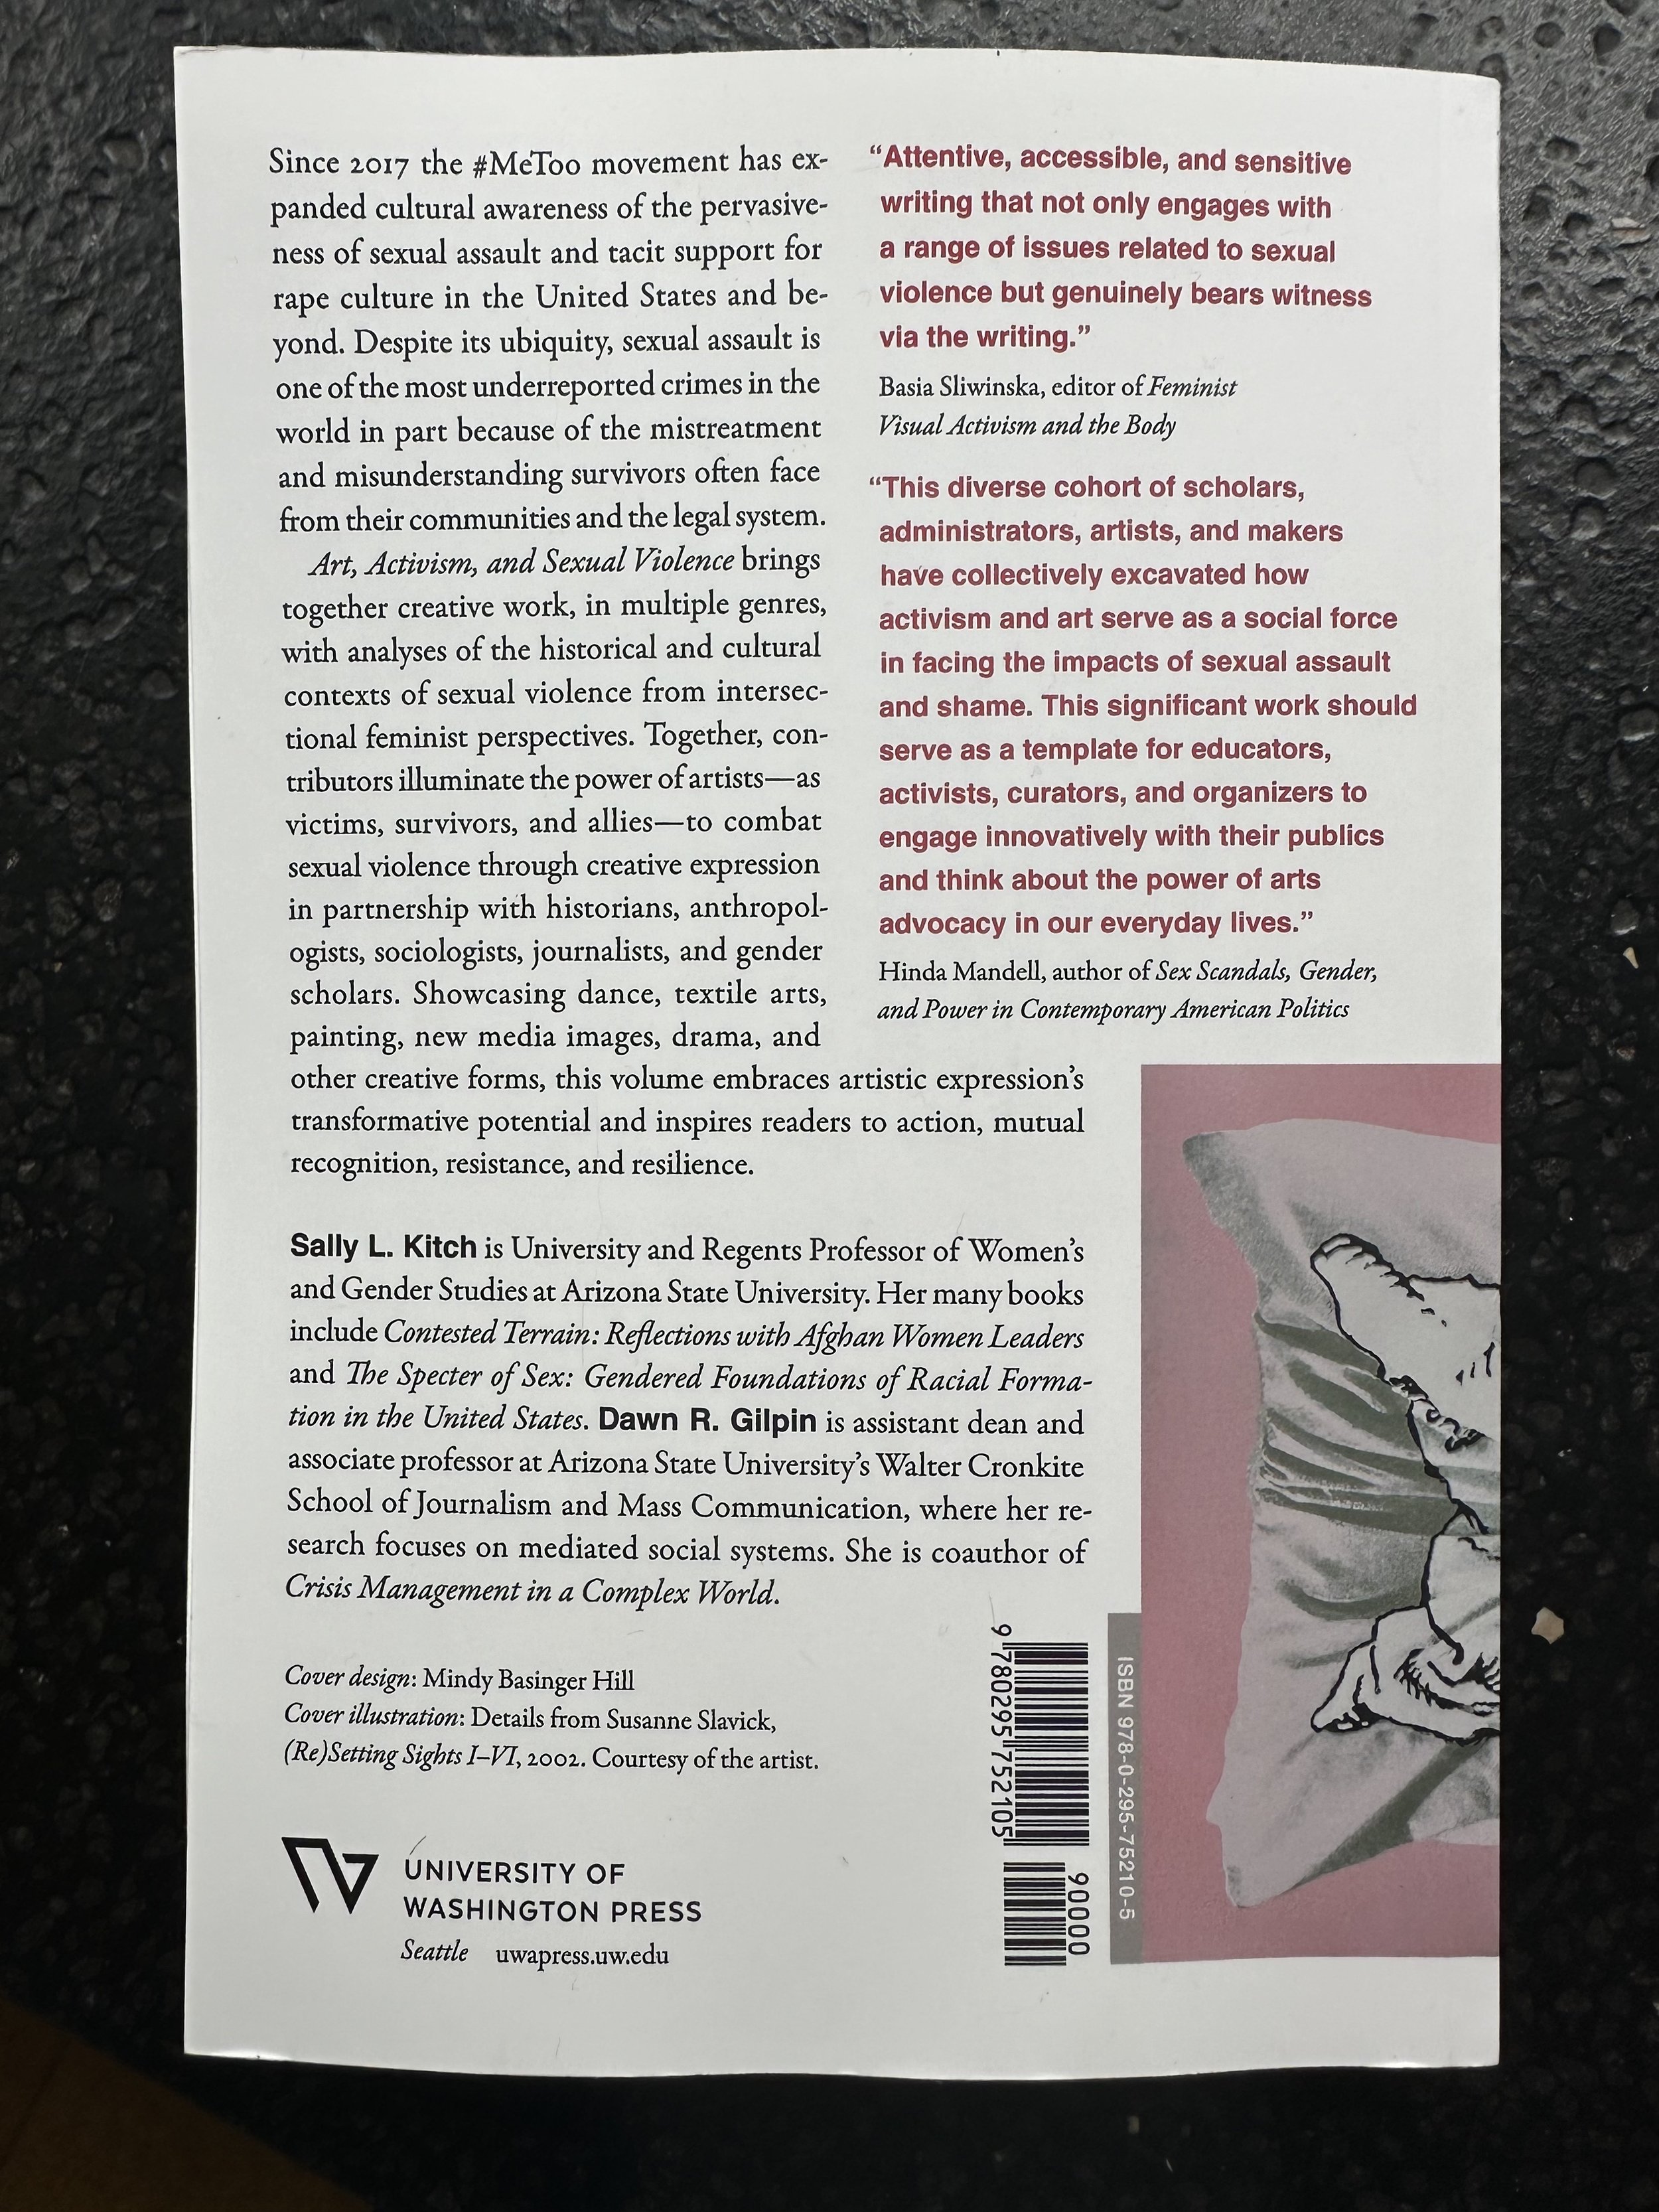 BACK COVER OF ART, ACTIVISM, AND SEXUAL VIOLENCE